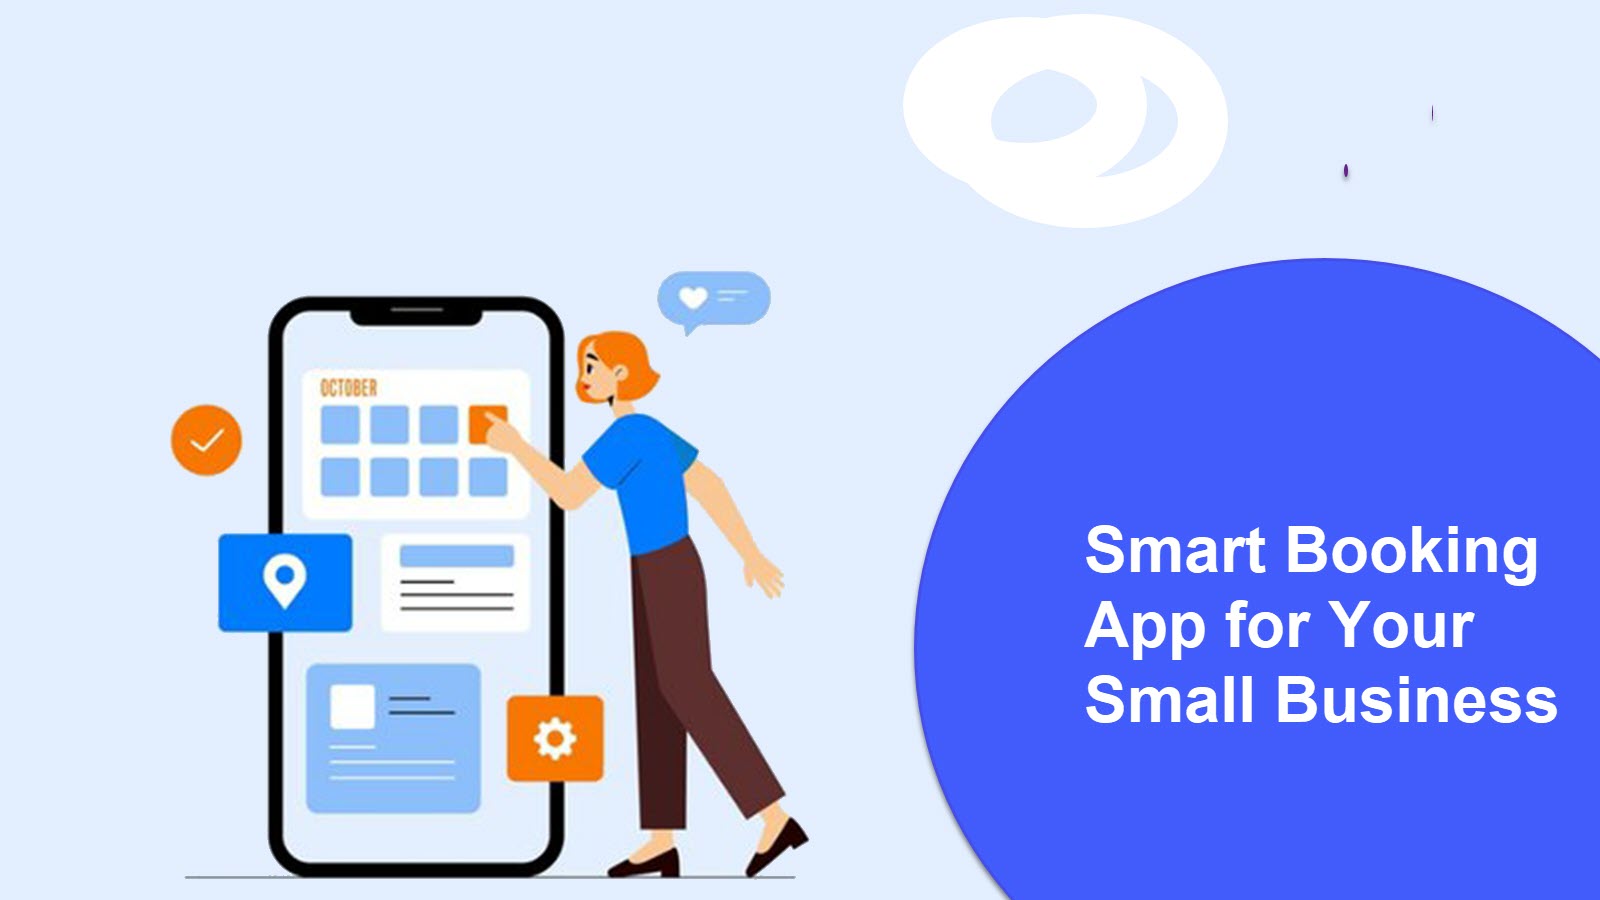 Smart booking app for your small business